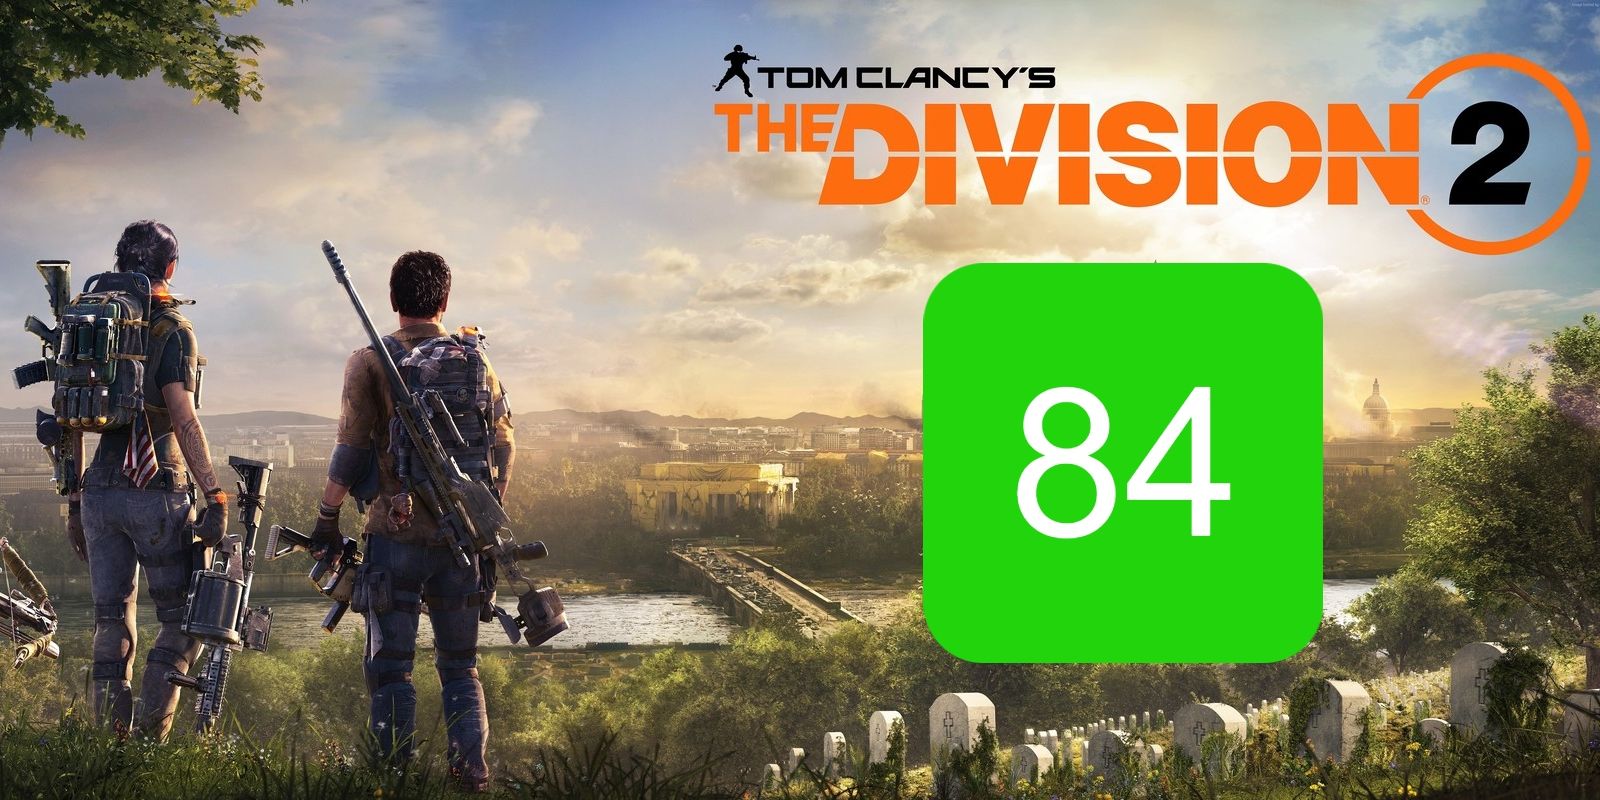 The Division2 Metascore for PC featuring the game's logo